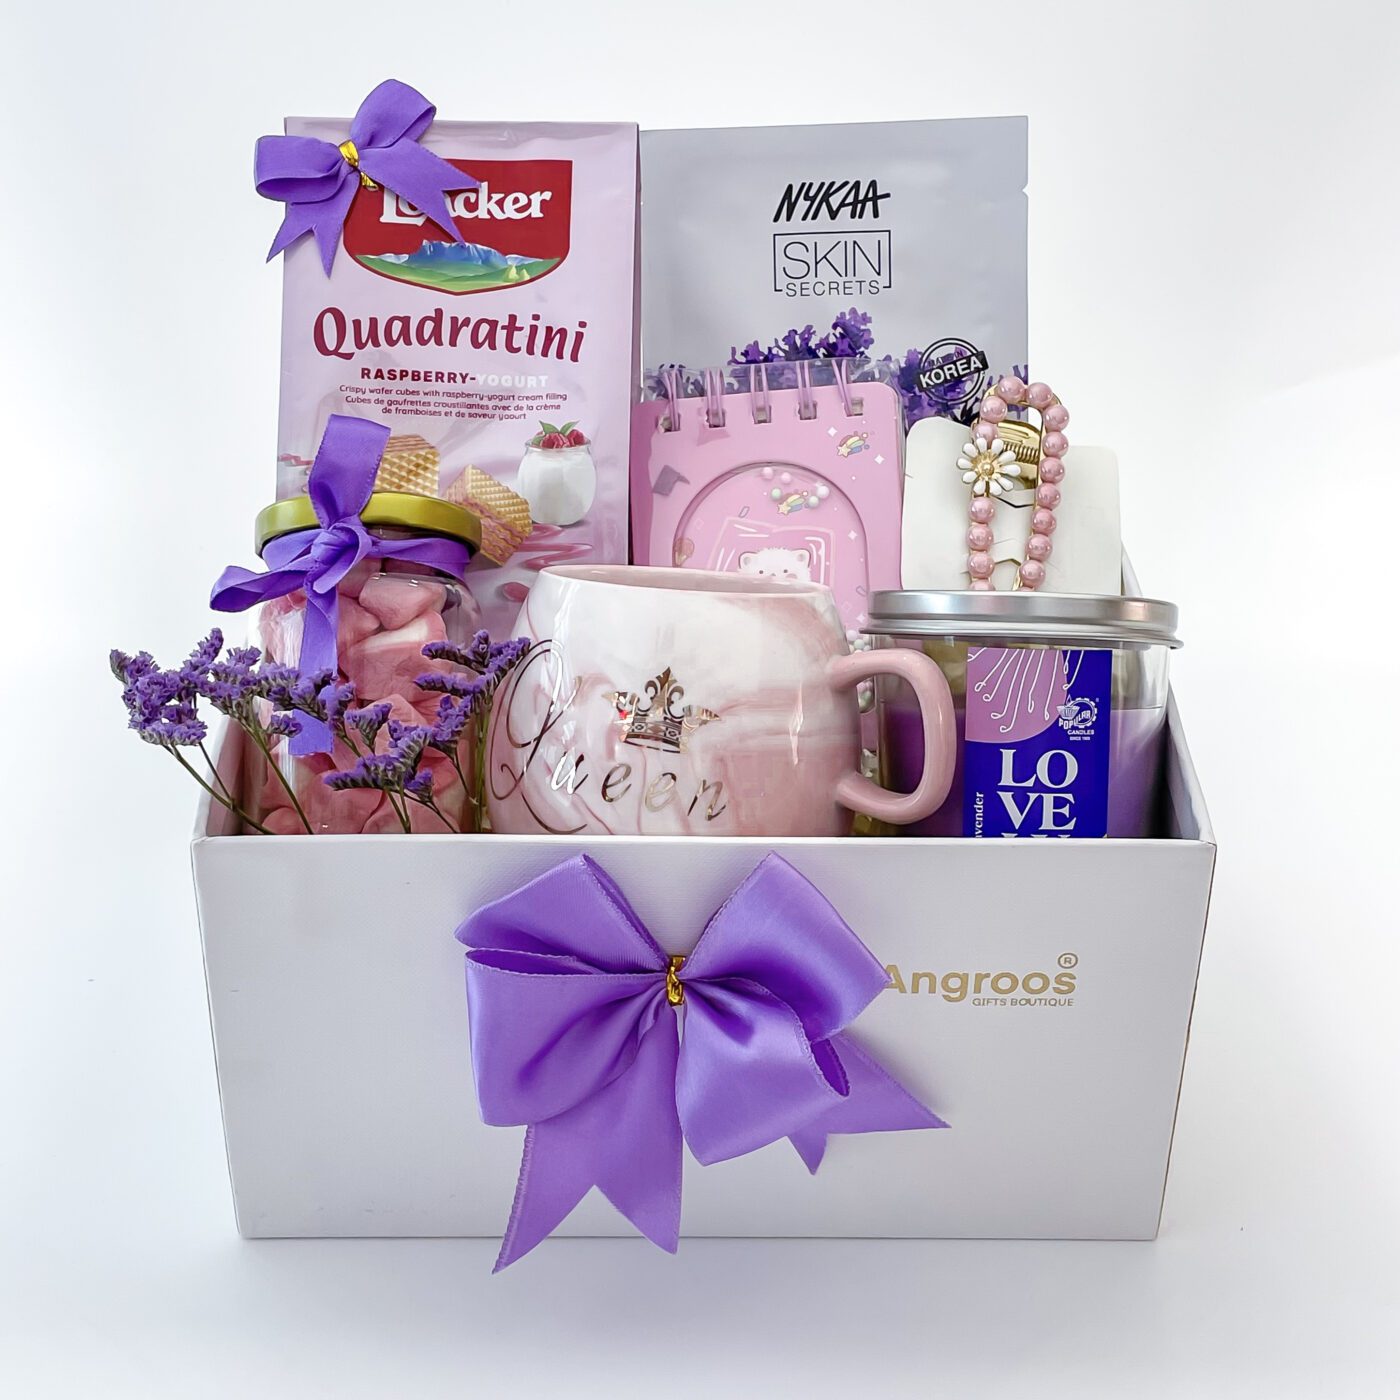 New Year's Gift Baskets & New Year's Eve Gifts | 1800Baskets